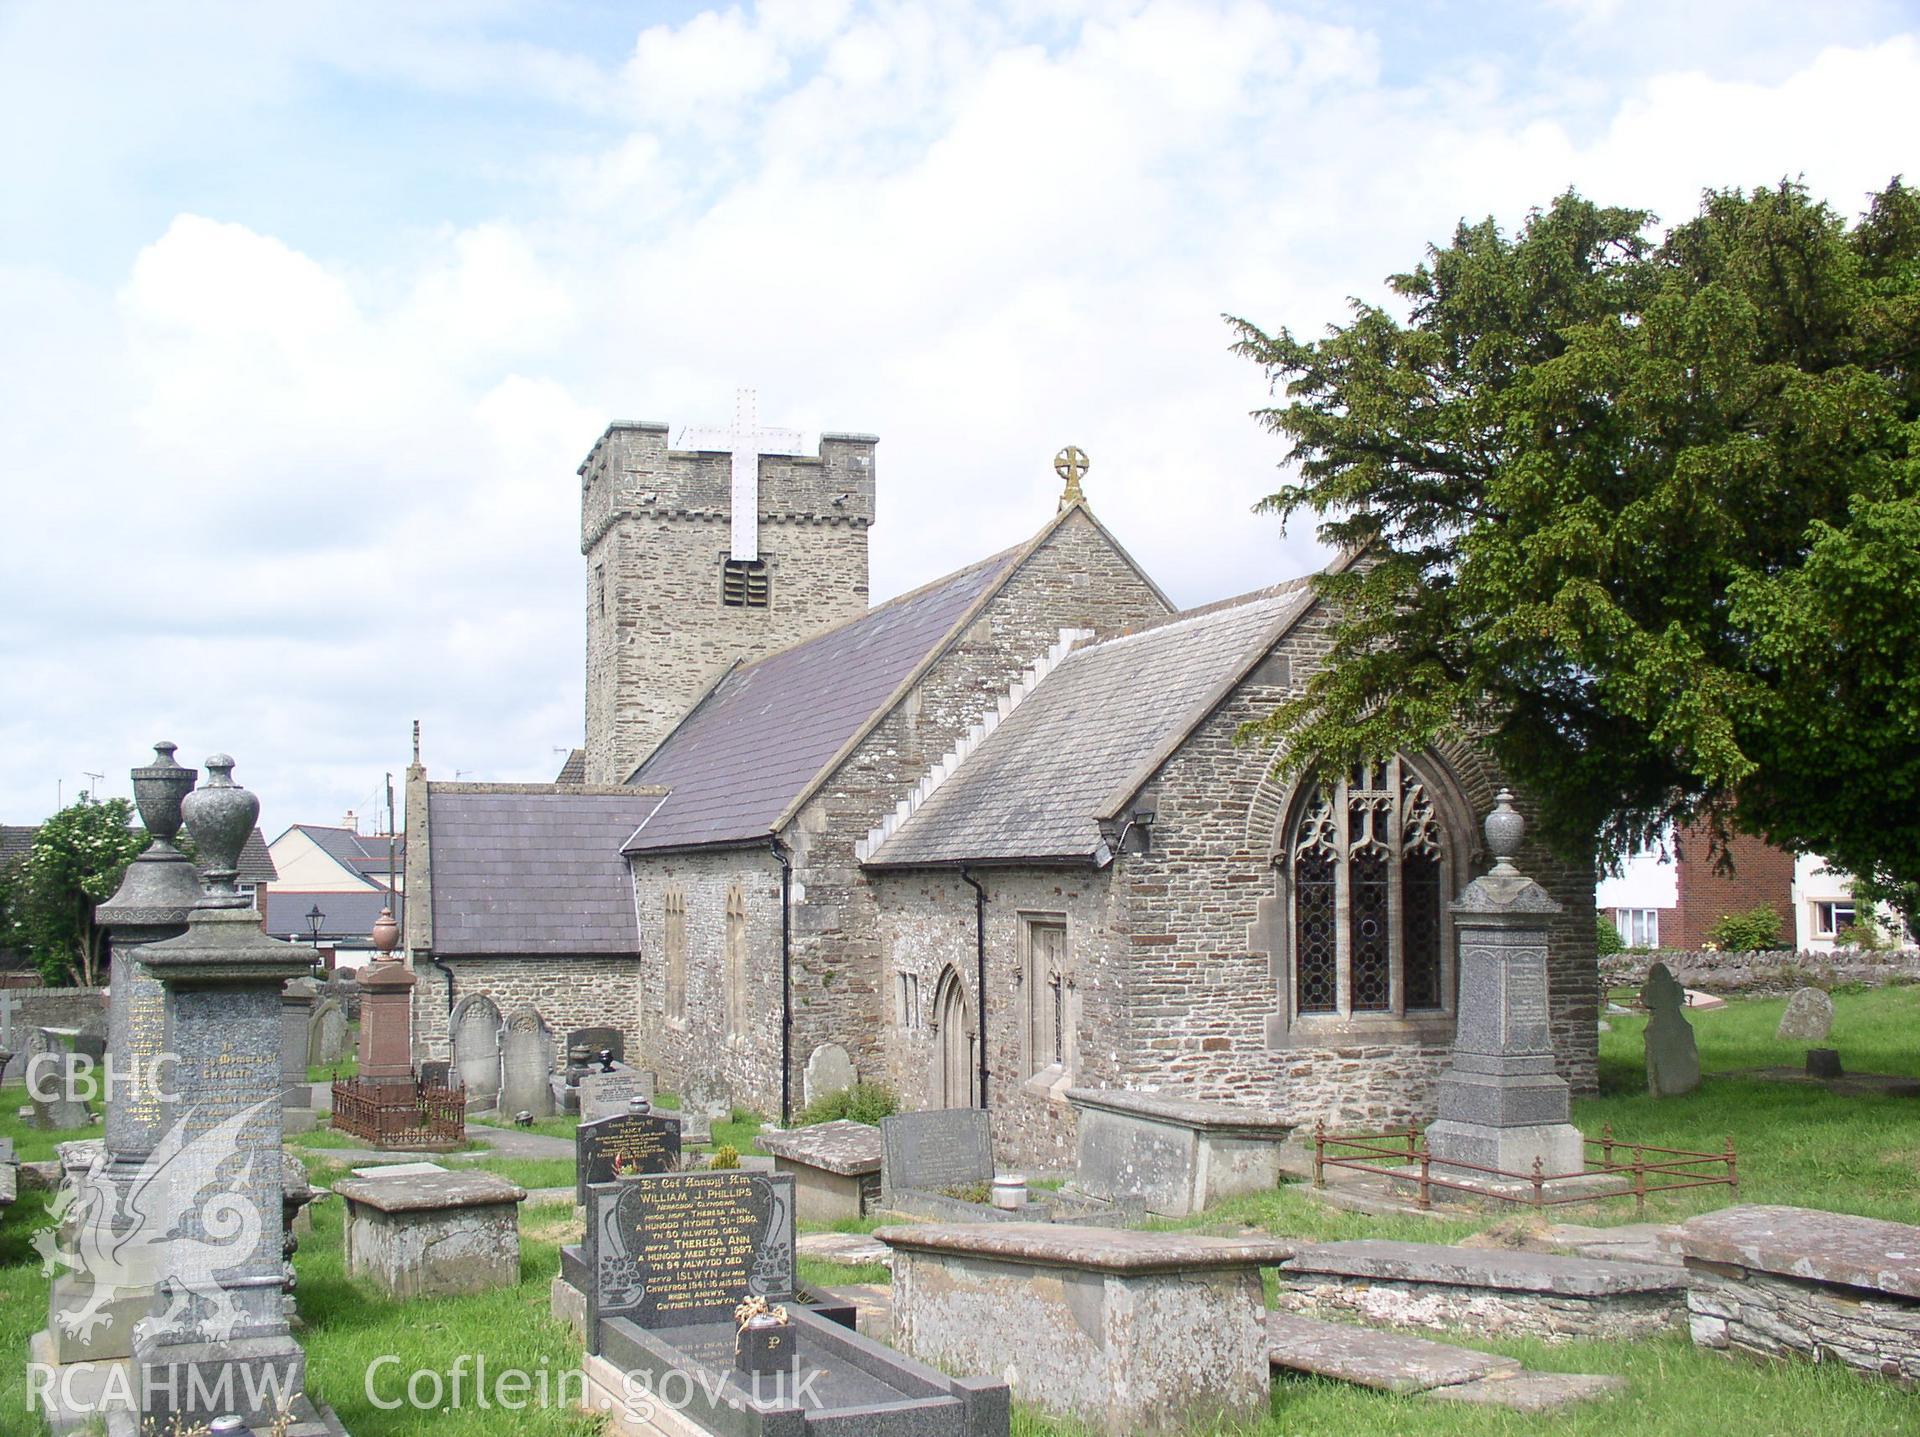 Colour digital photograph showing the exterior of St Tyfodwg's Church in Glamorgan.